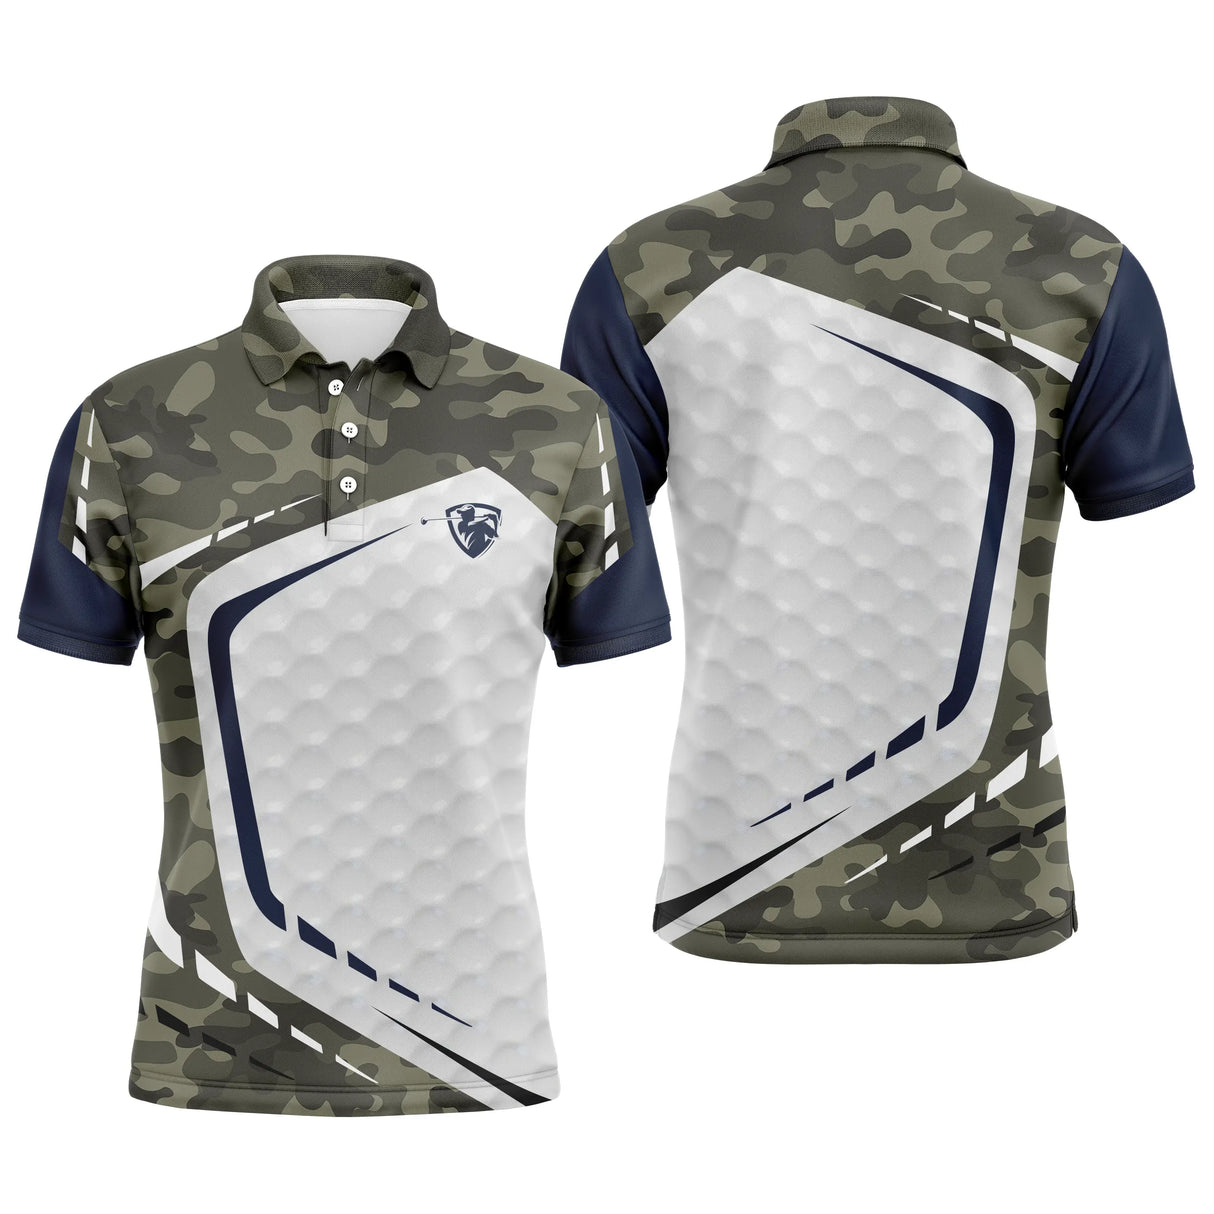 Chiptshirts - Golf Polo Shirt, Original Gift for Golf Fans, Men's and Women's Sports Polo Shirt, Camouflage Patterns, Golf Ball, Golf Logo - CTS26052208